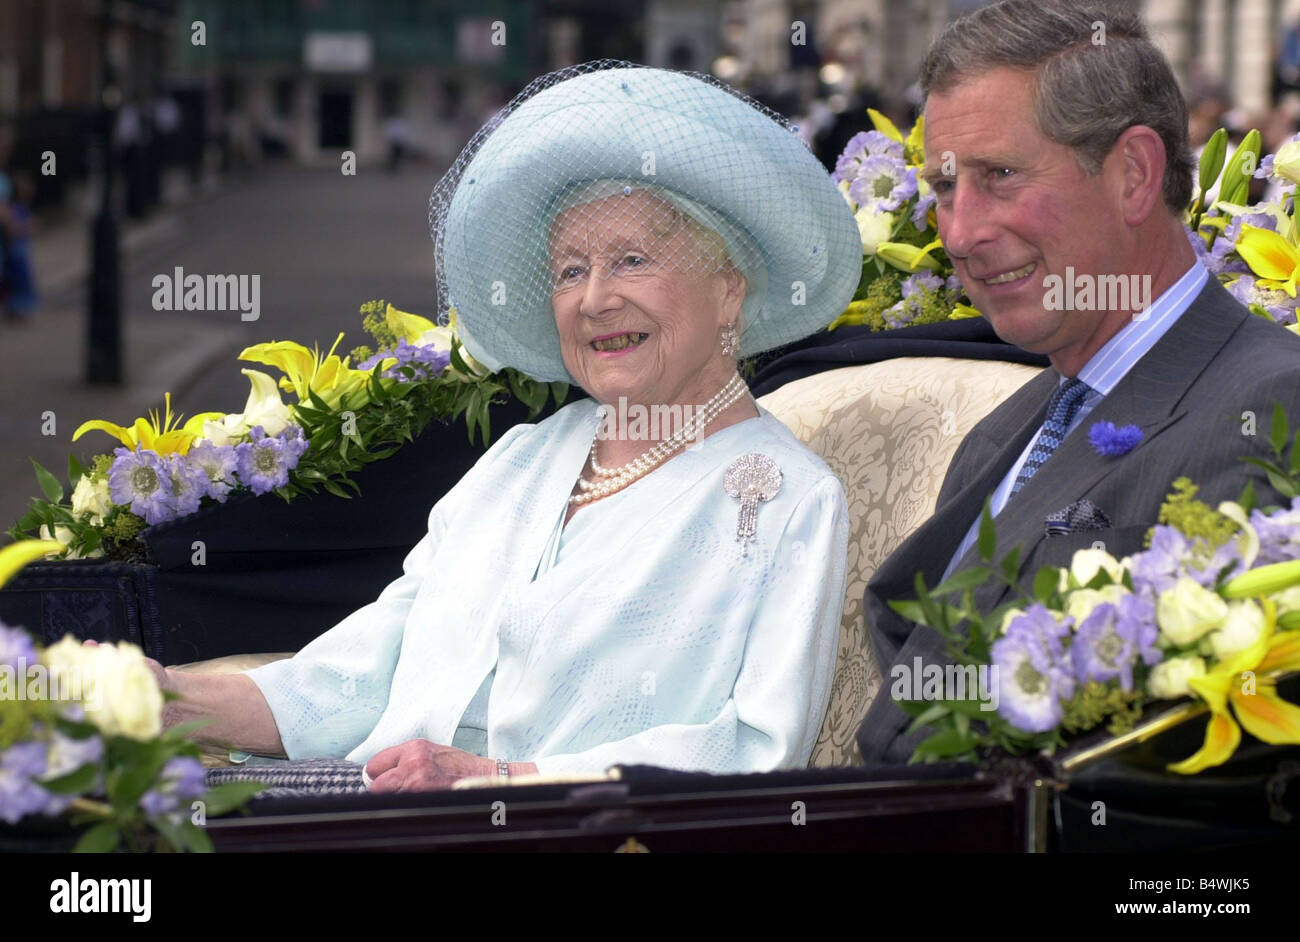 The Queen Mother celebrates her 100th Birthday August 2000 Her day began by taking the Salute outside her London residence Clarence House as The King s Troop Royal Horse Artillery marched past followed by a band playing Happy Birthday A Royal Mail postman arrived to deliver a birthday card from her daughter The Queen as is tradition in Great Britain for anyone who reaches their 100th birthday they will receive a personal card from The Queen Her Majesty then travelled to Buckingham Palace with Prince Charles The Prince of Wales where she was joined by other members of the Royal Family on the Stock Photo